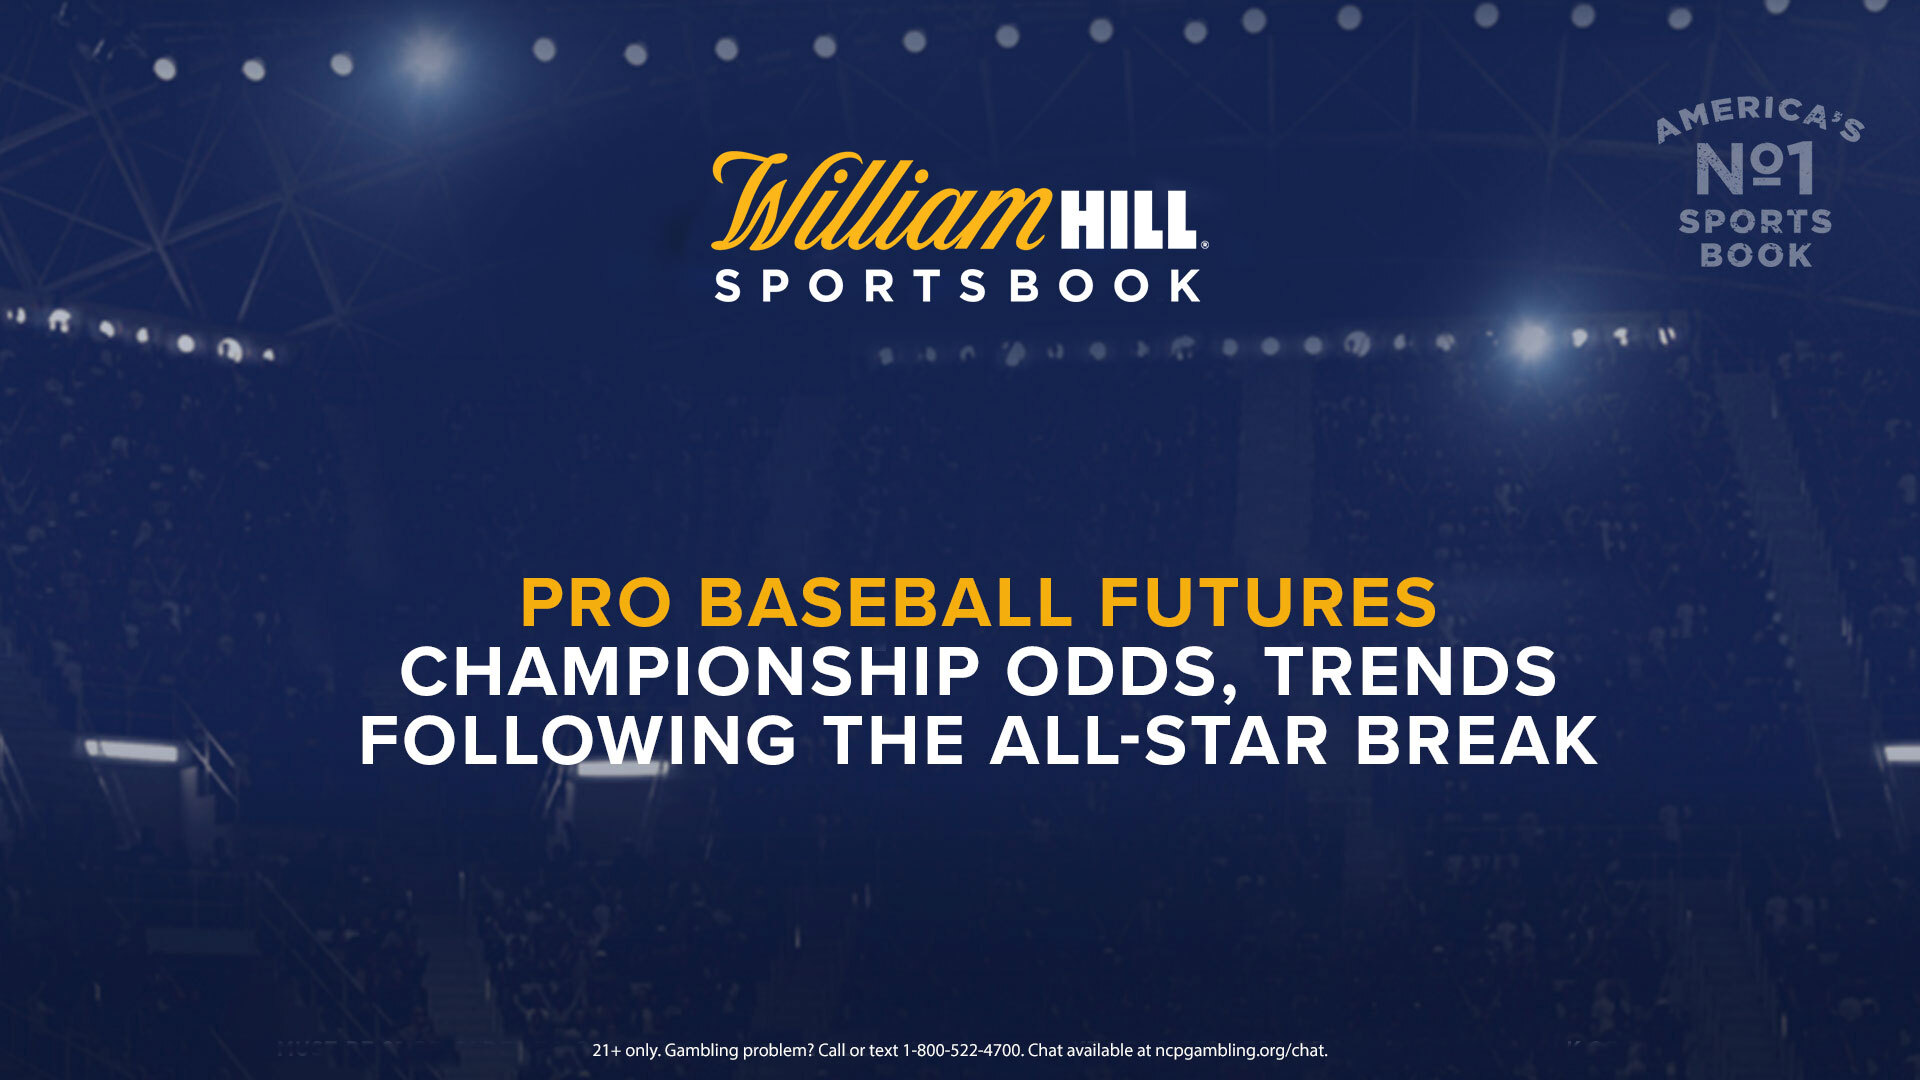 Pro Baseball Futures Championship Odds, Trends Following the AllStar